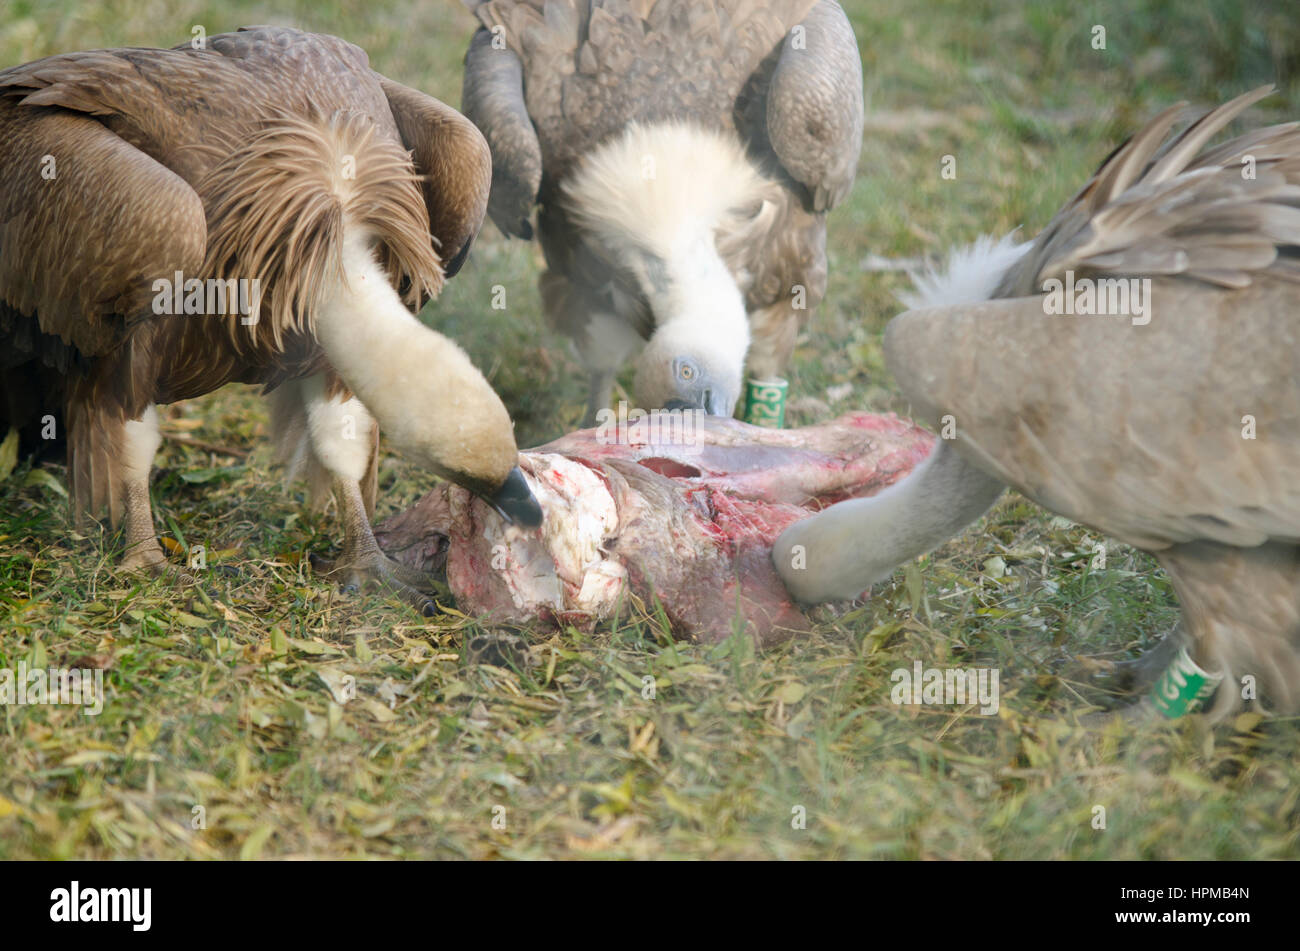 Vultures eating meat Stock Photo